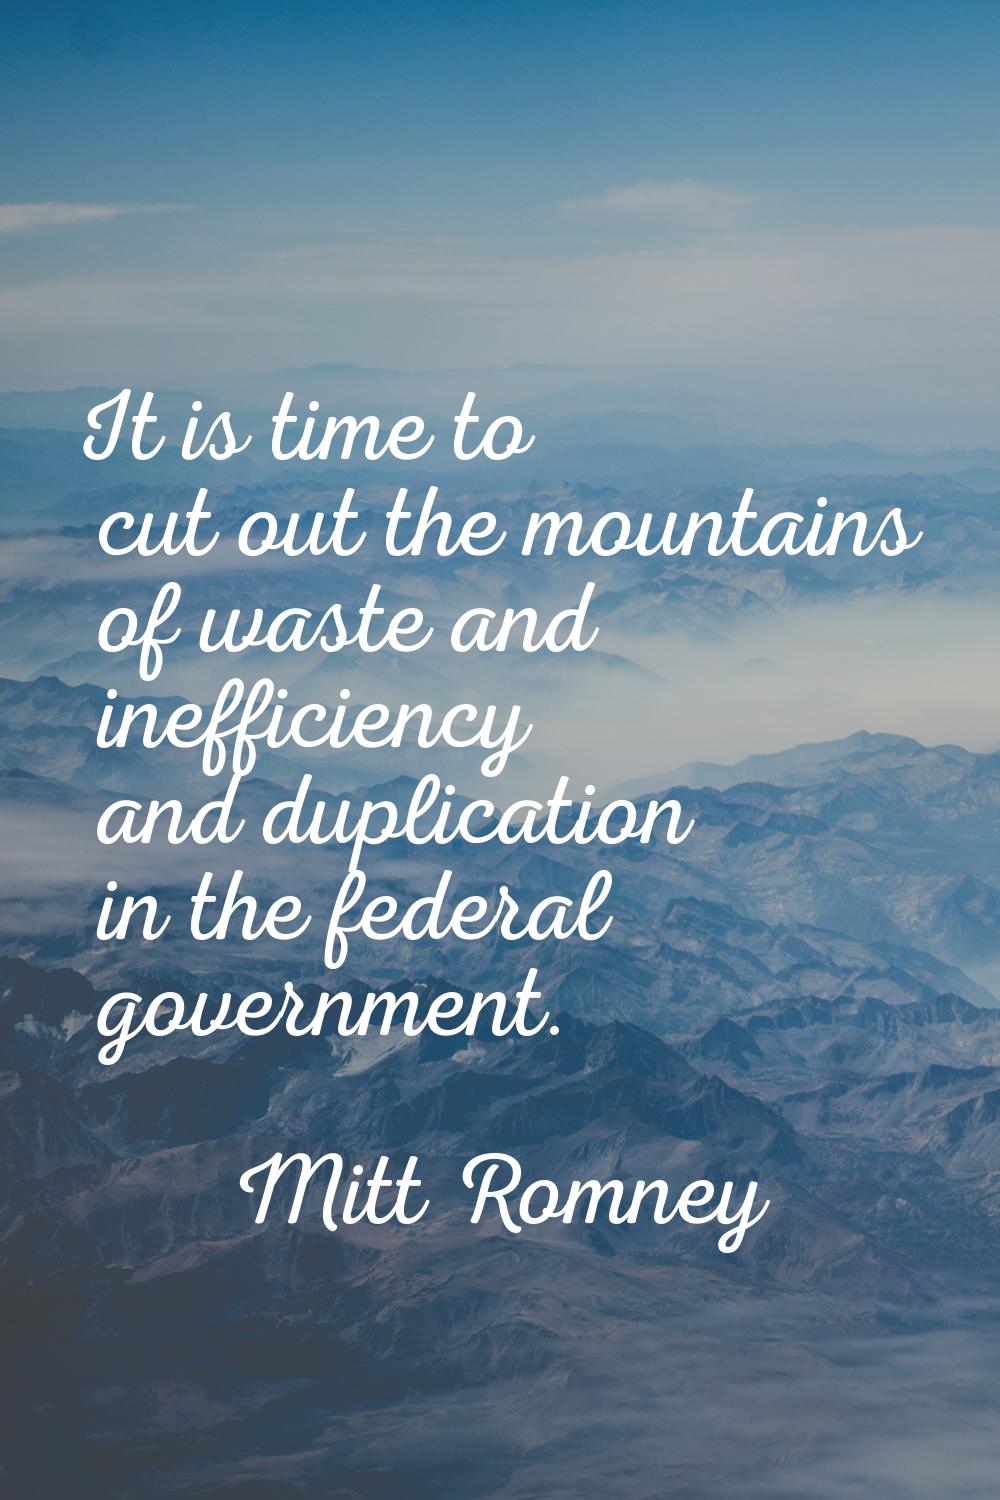 It is time to cut out the mountains of waste and inefficiency and duplication in the federal govern